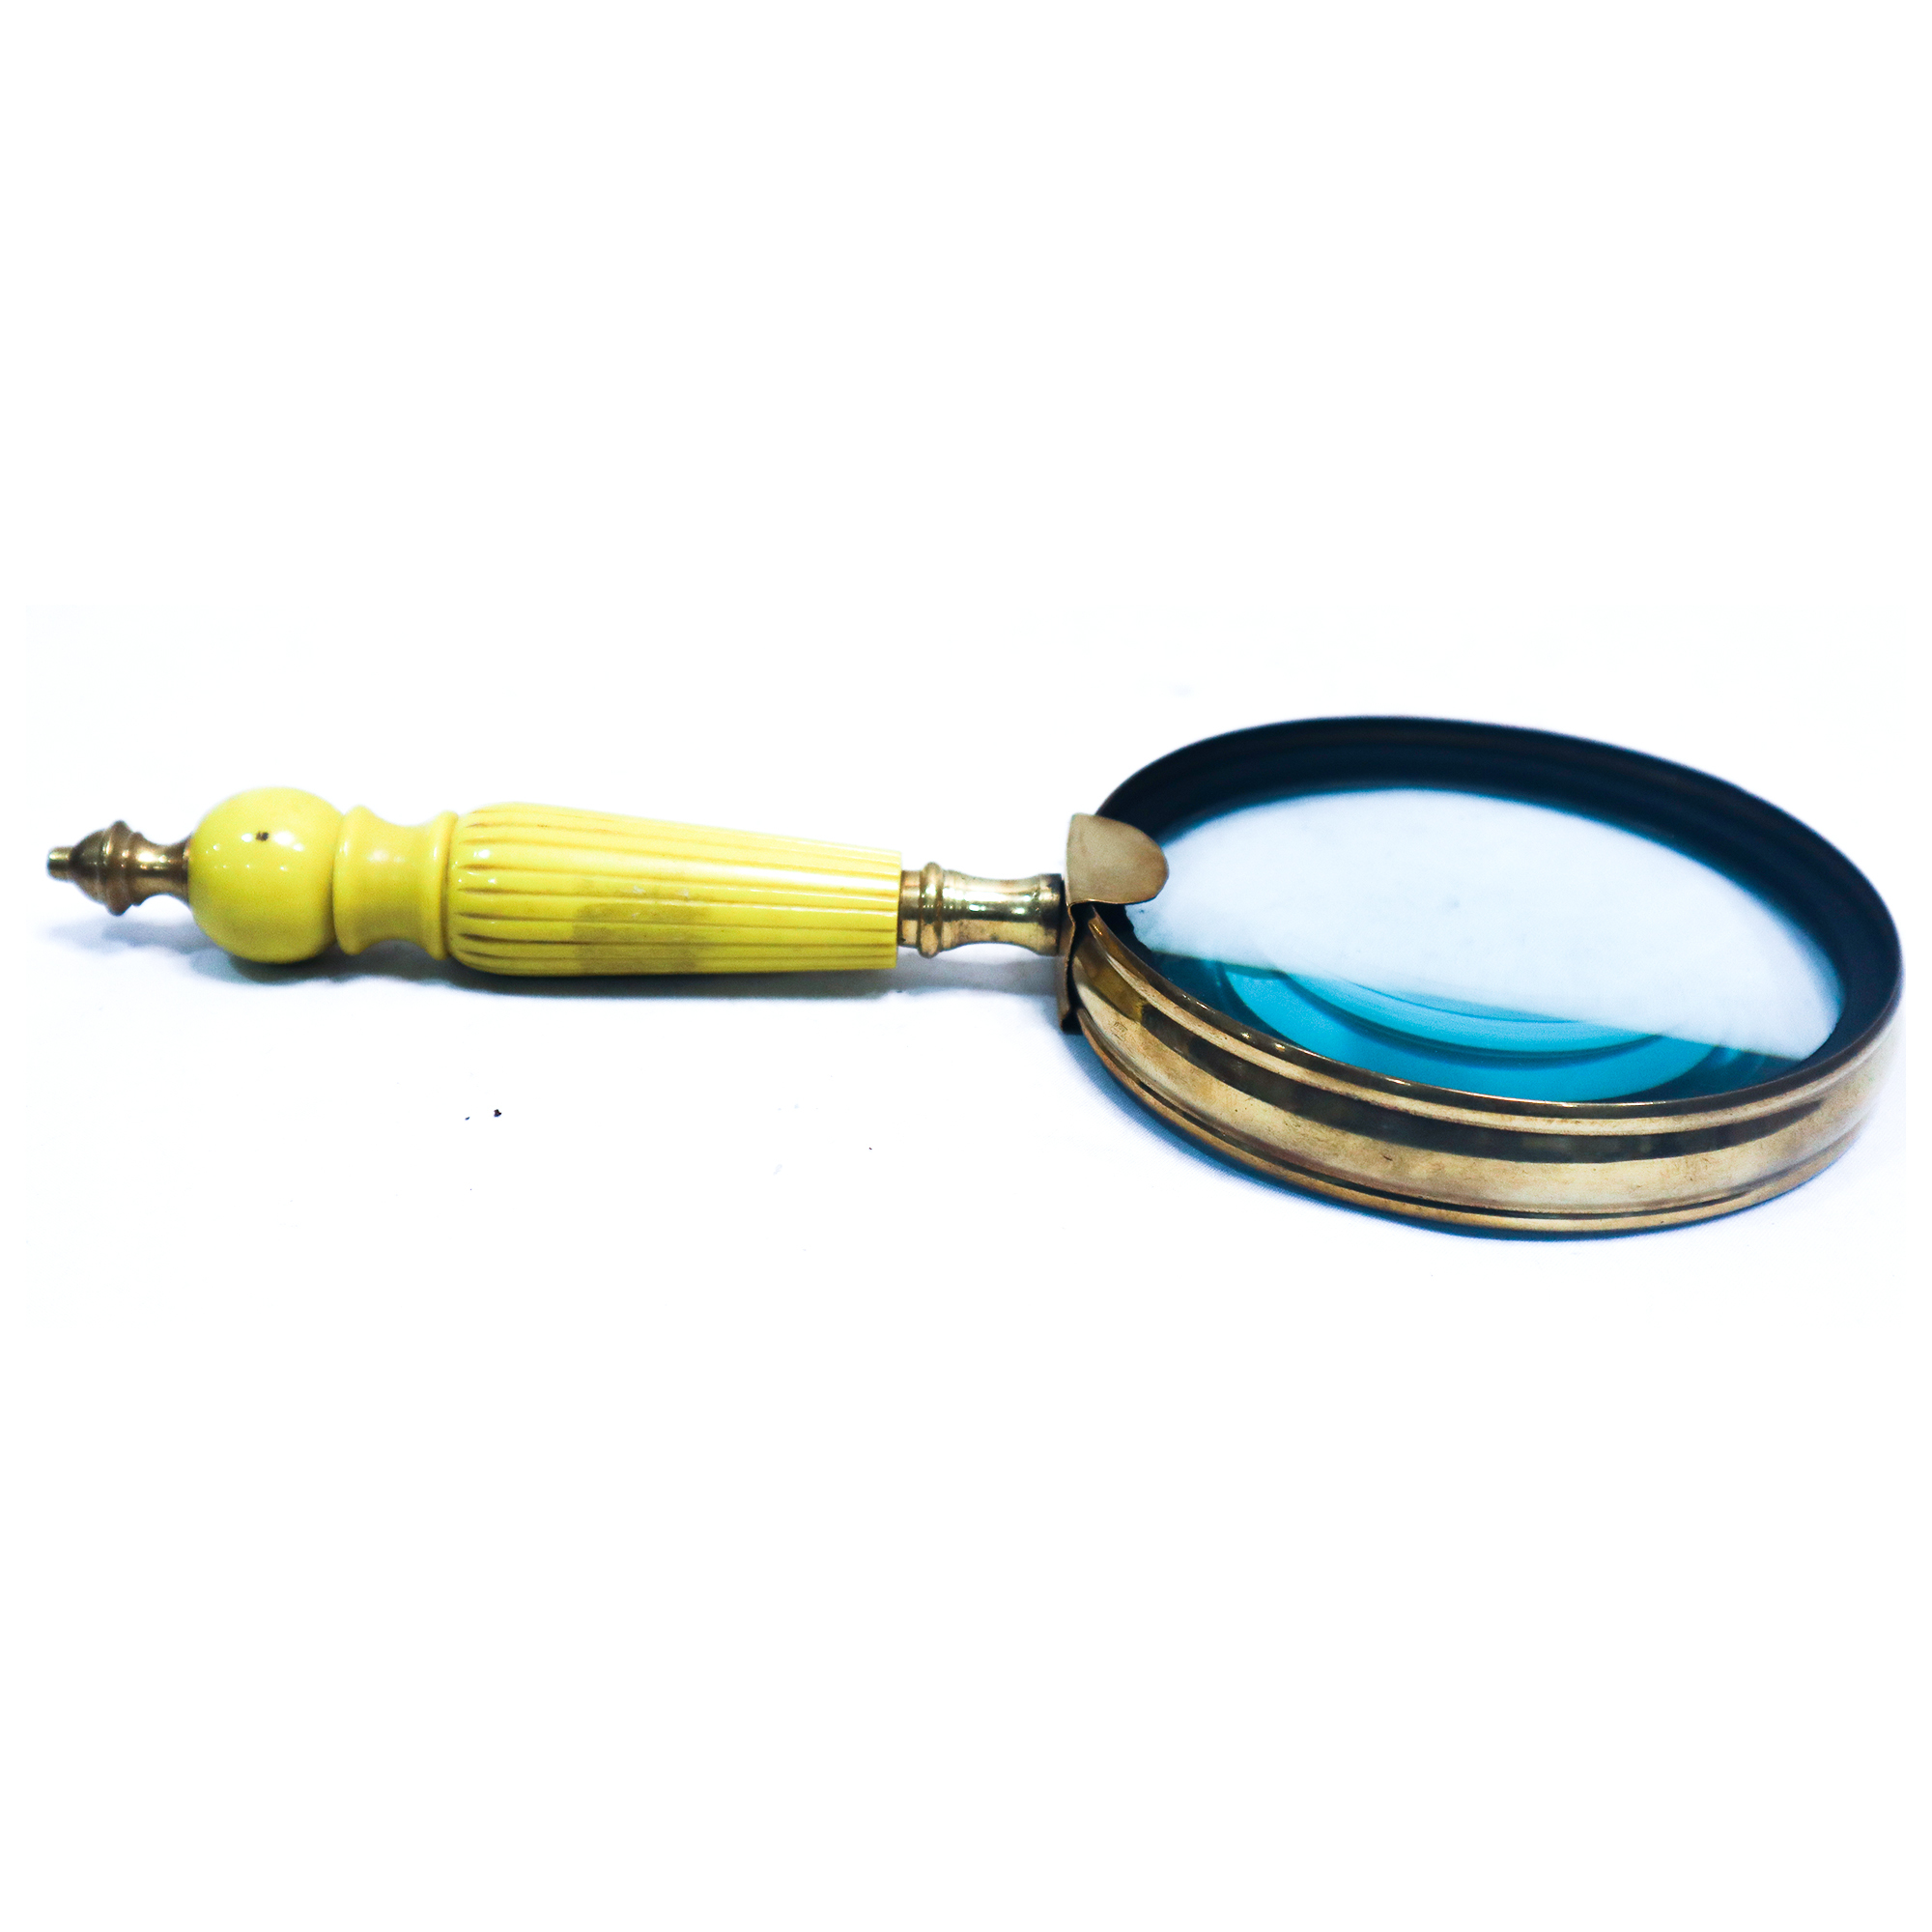 Brass Magnifying Glass Capital International 10X Handheld Magnifier Reading Magnifying Glass with High-Powered with 10X Zoom Lens.